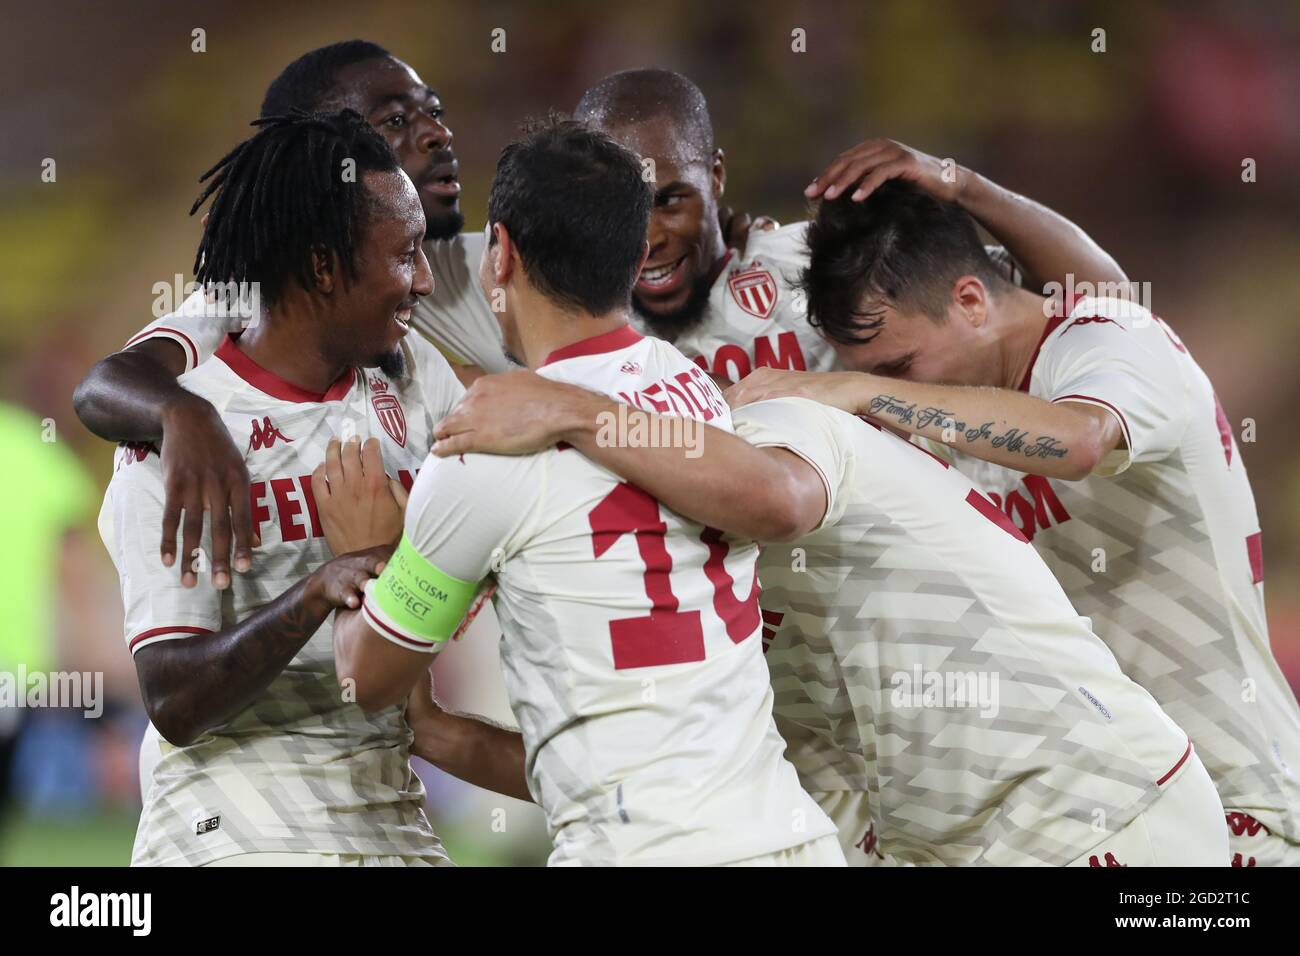 Monaco, Monaco, 10th August 2021. Gelson Martins of AS Monaco celebrates with team mates after scoring to give the side a 1-0 lead during the UEFA Champions League match at Stade Louis II, Monaco. Picture credit should read: Jonathan Moscrop / Sportimage Stock Photo